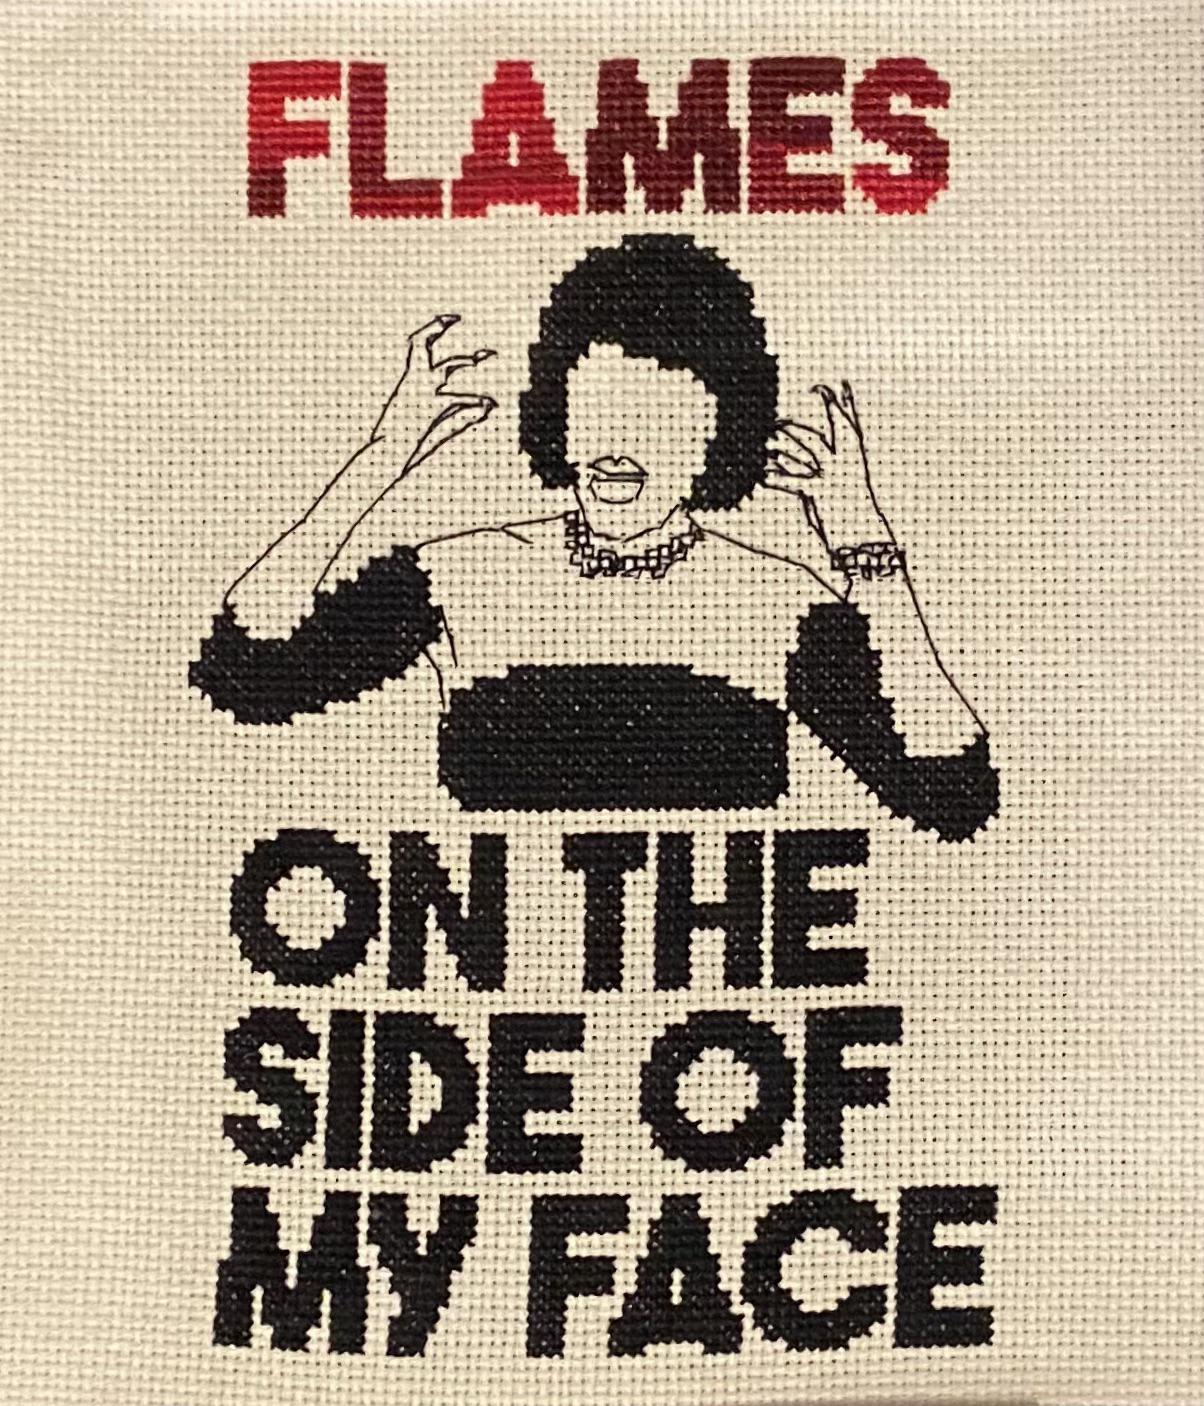 [FO] “Flames. Flames! Flaaaames…on the side of my face, breathing, breathless, heaving breaths.” —Mrs. White